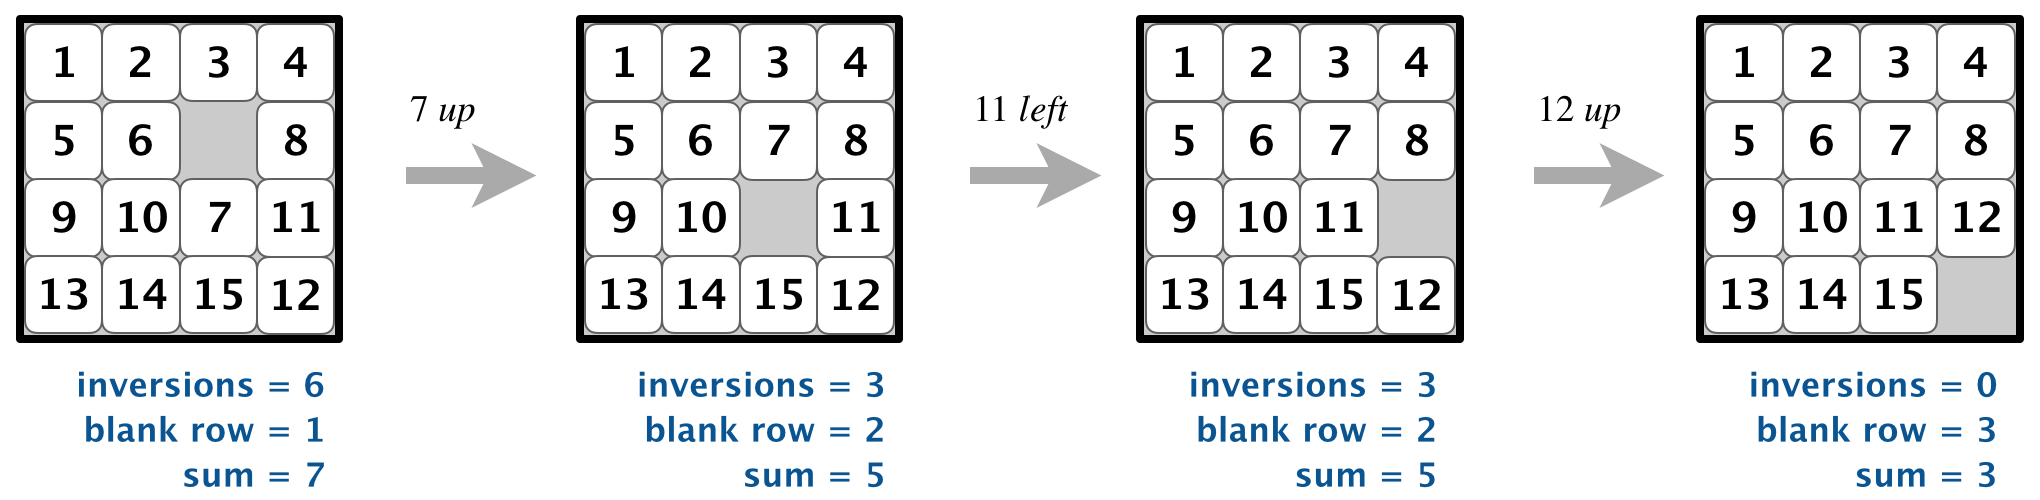 number of inversions + row of blank changes by an even amount when n is even